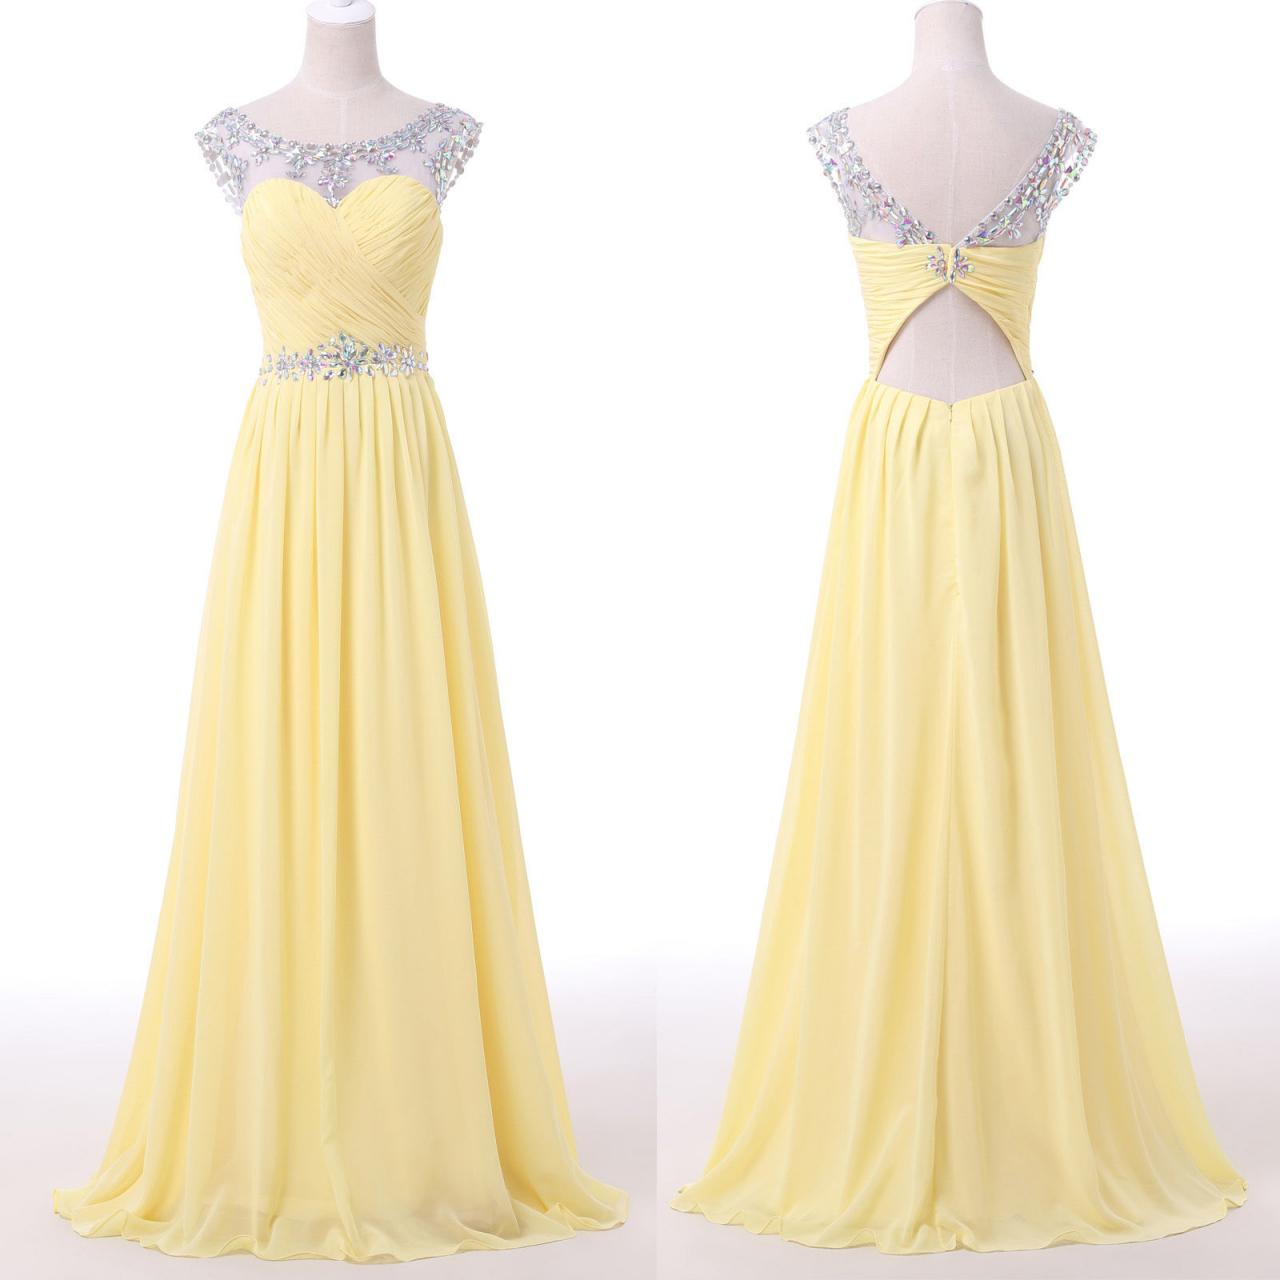 Daffodial Long Chiffon Prom Dresses,elegant Pretty Prom Gowns,party Gowns,charming Modest Evening Gowns